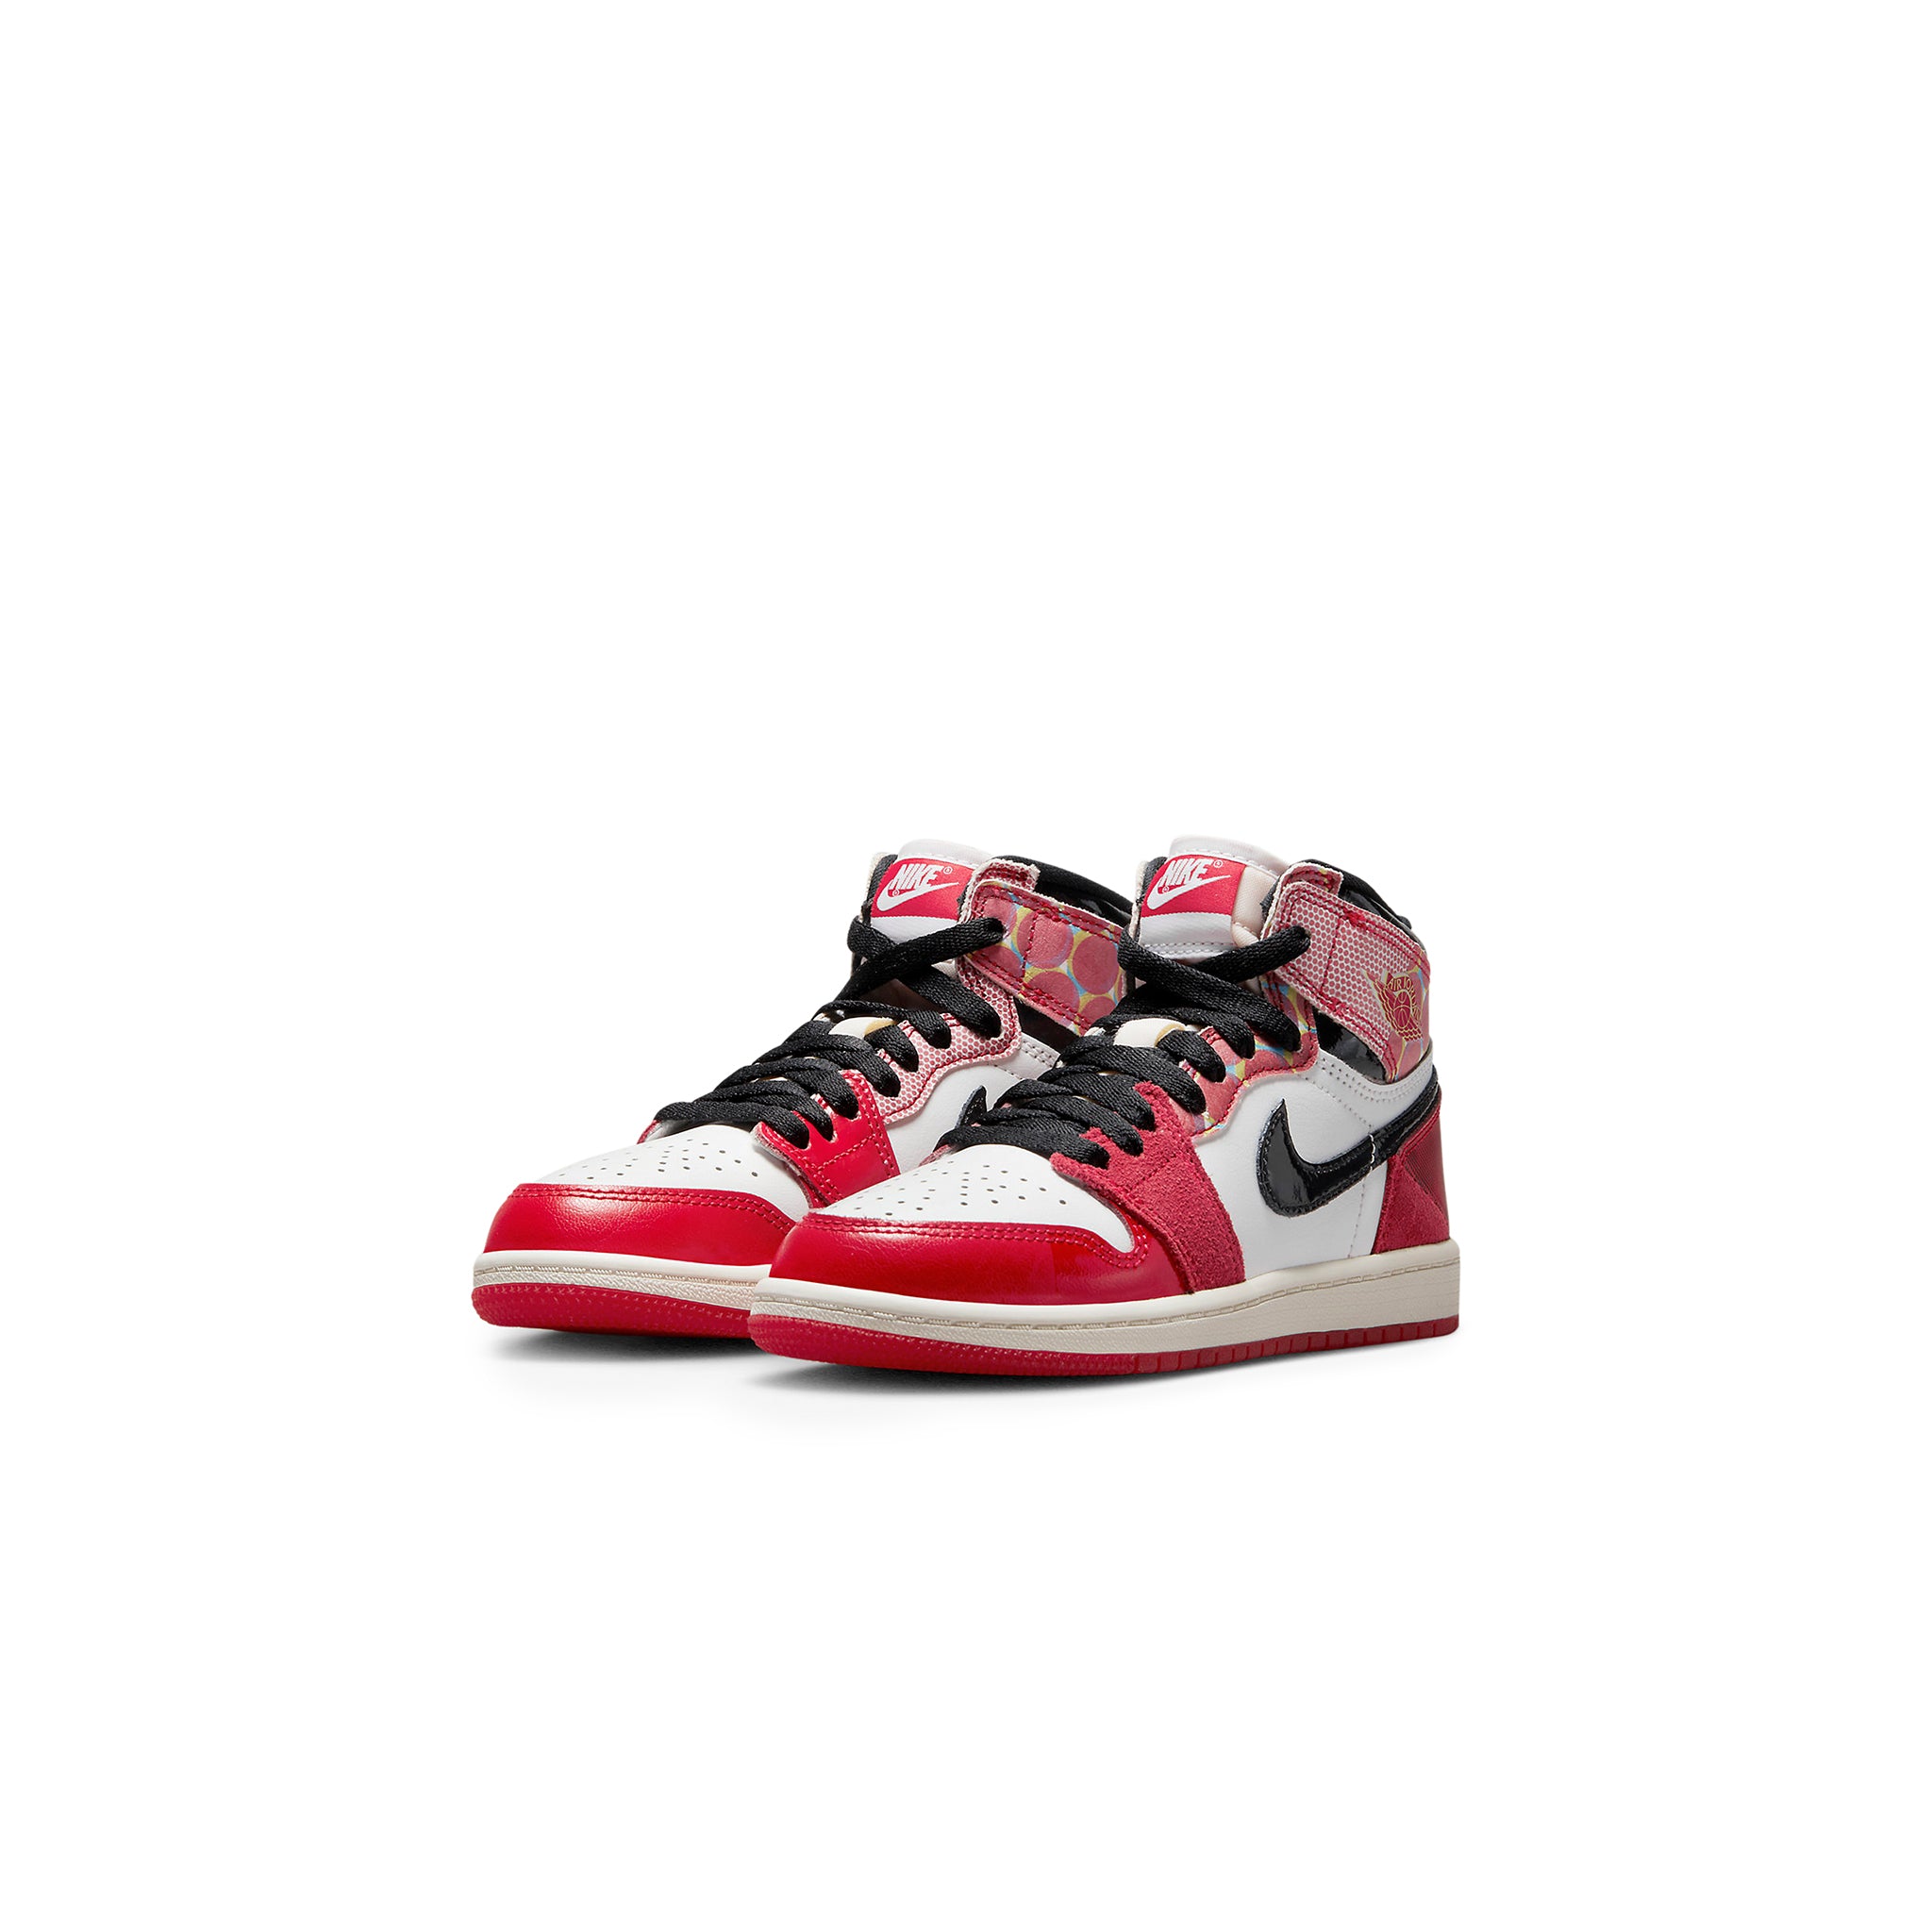 Front side view of Air Jordan 1 Retro High OG Spider-Man Across The Spider-Verse (PS) DV1749-601